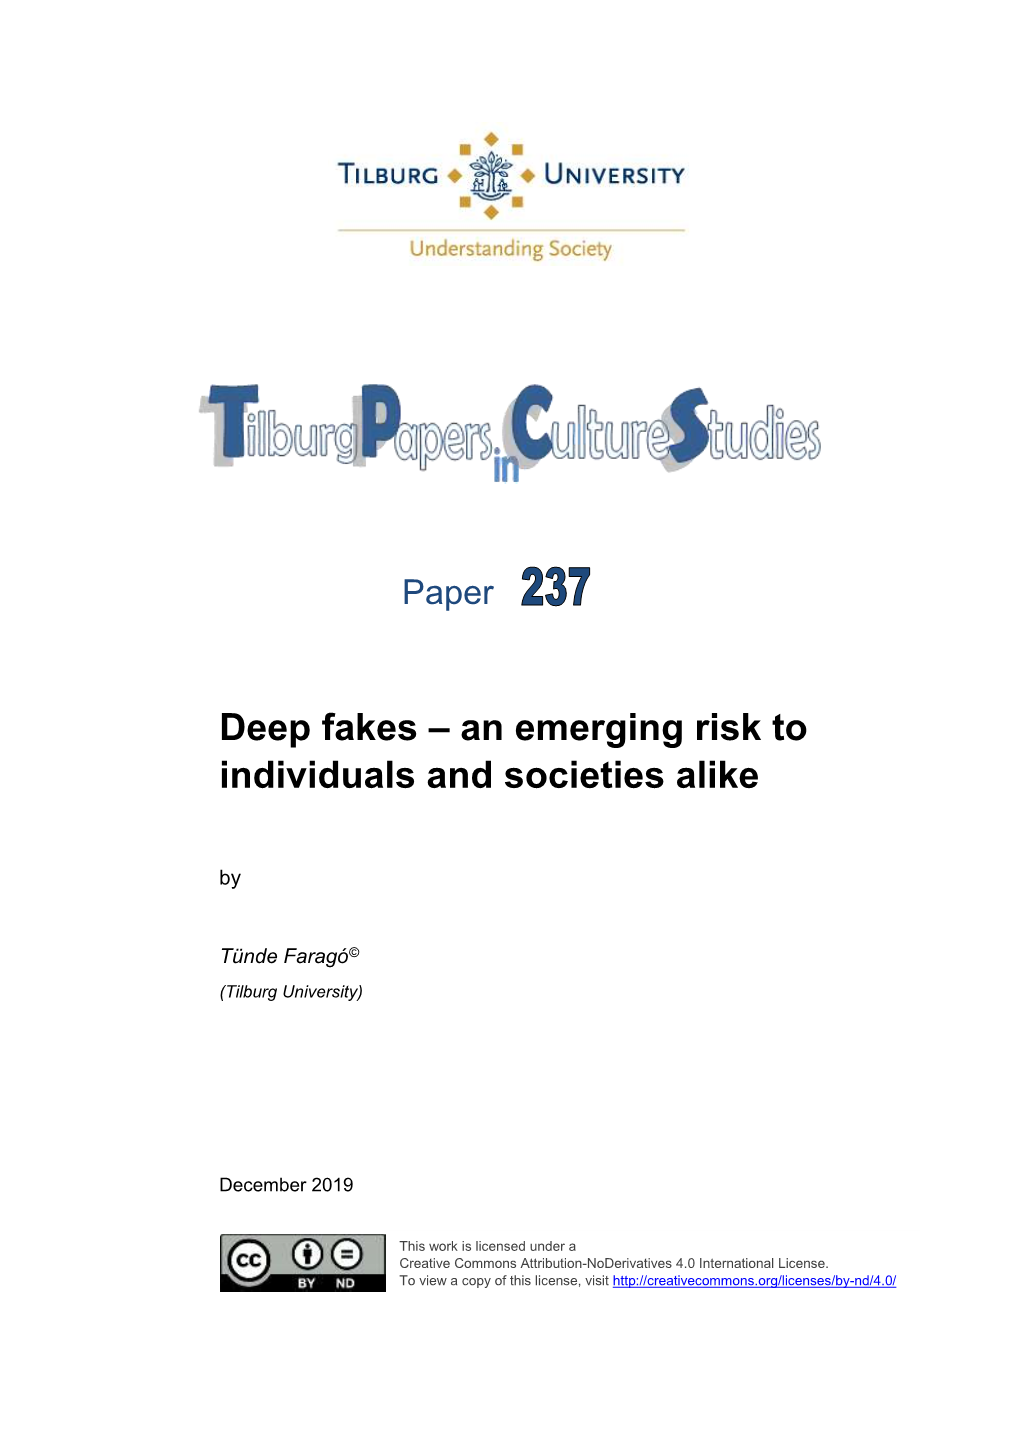 Deep Fakes – an Emerging Risk to Individuals and Societies Alike